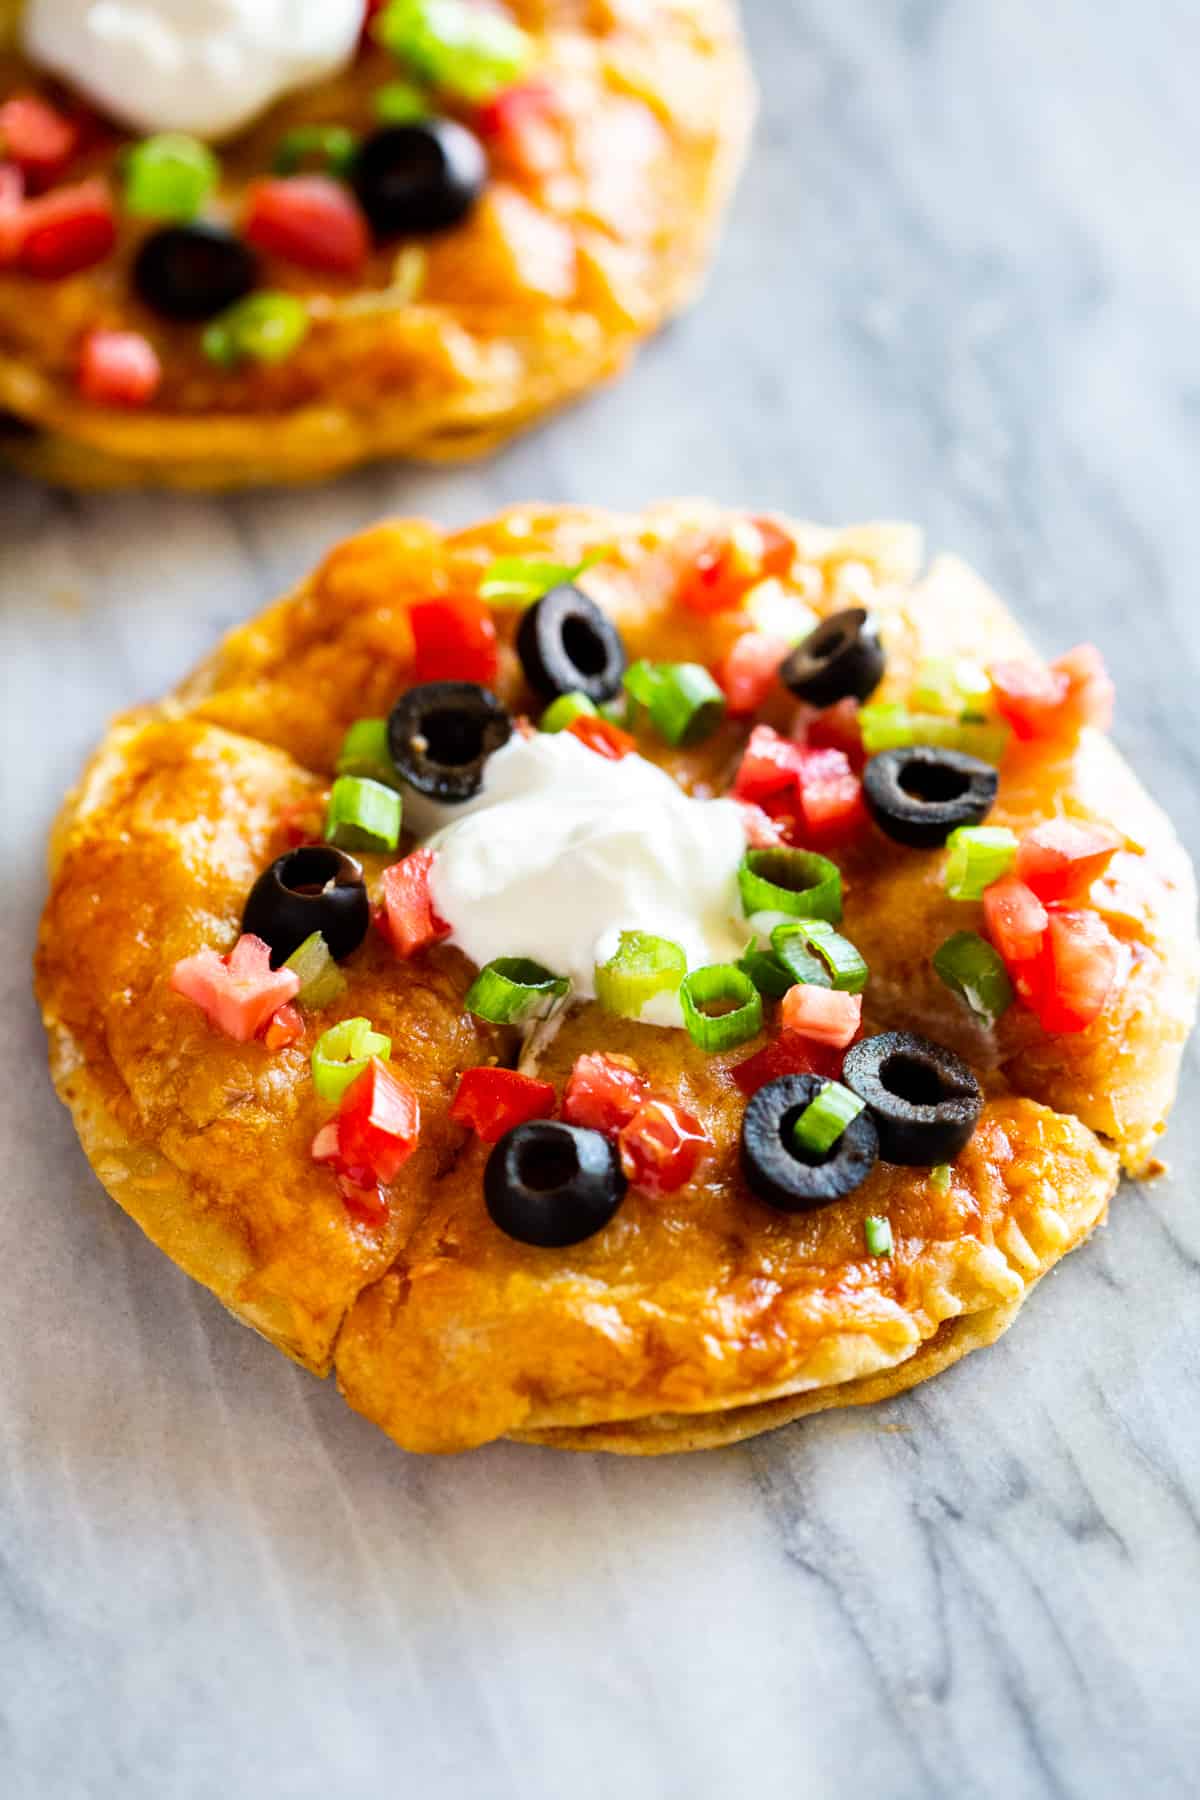 A homemade Mexican Pizza topped with olives, tomatoes, green onions, and sour cream.